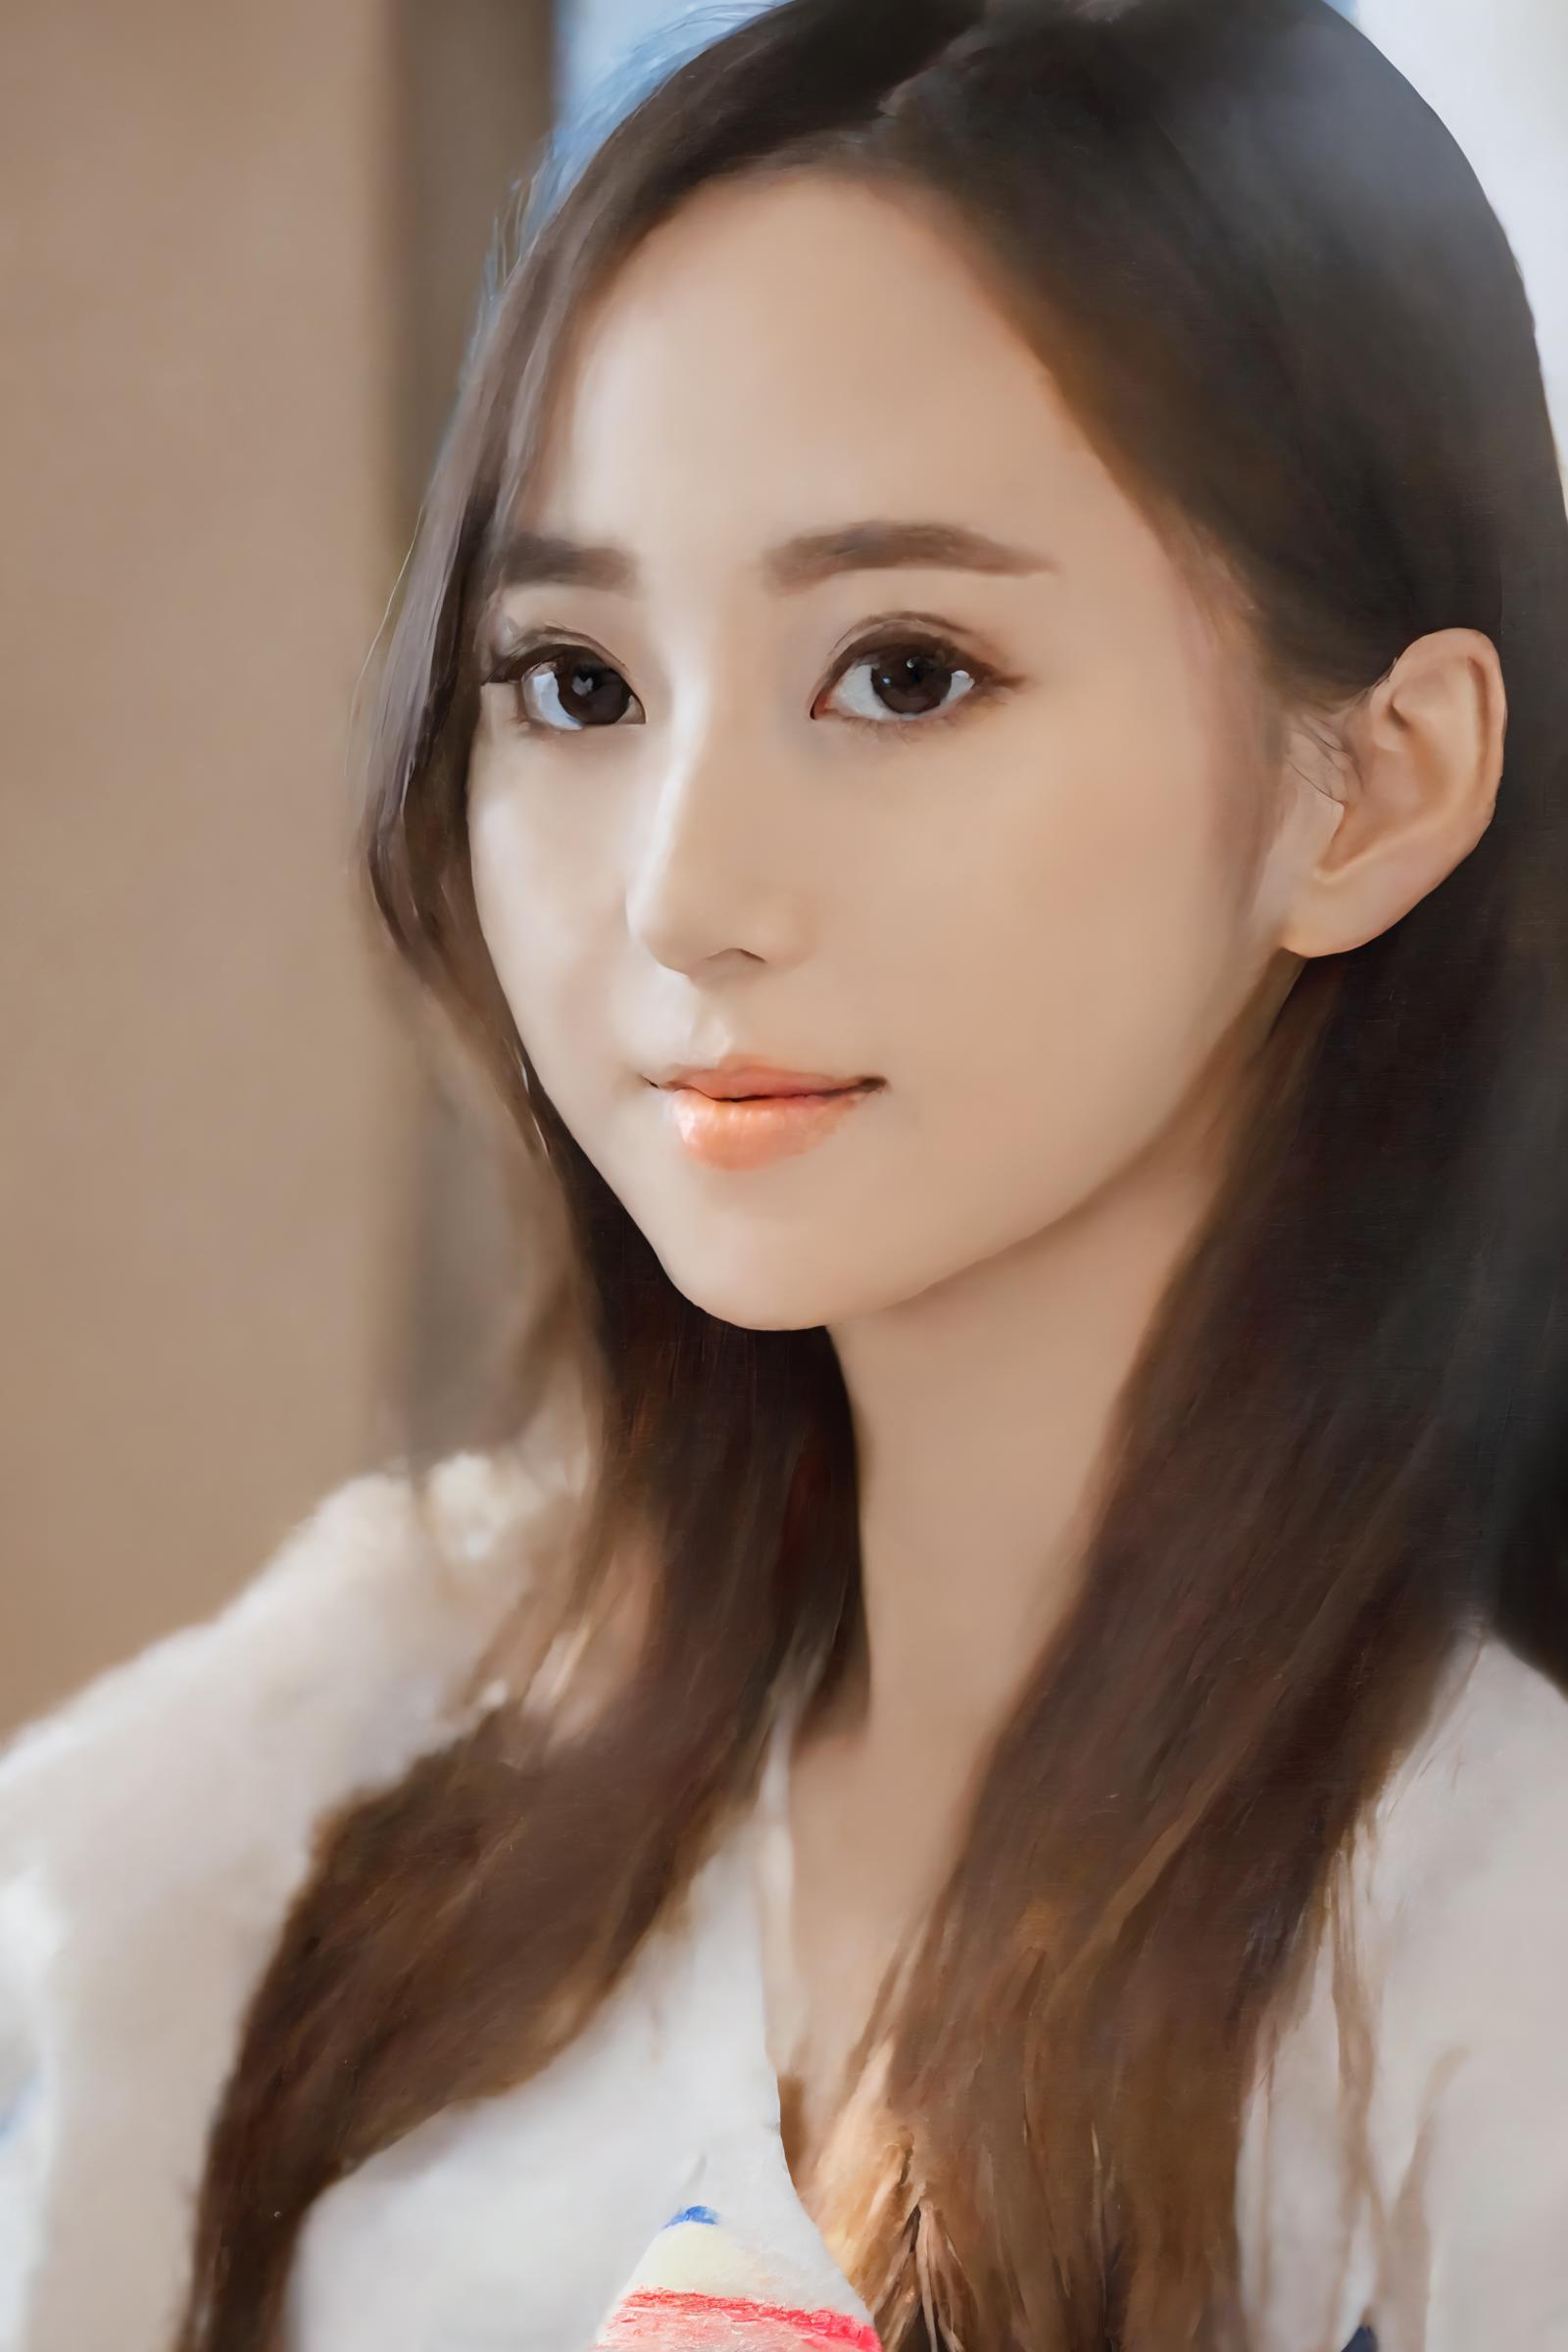 AI model image by kwResearch